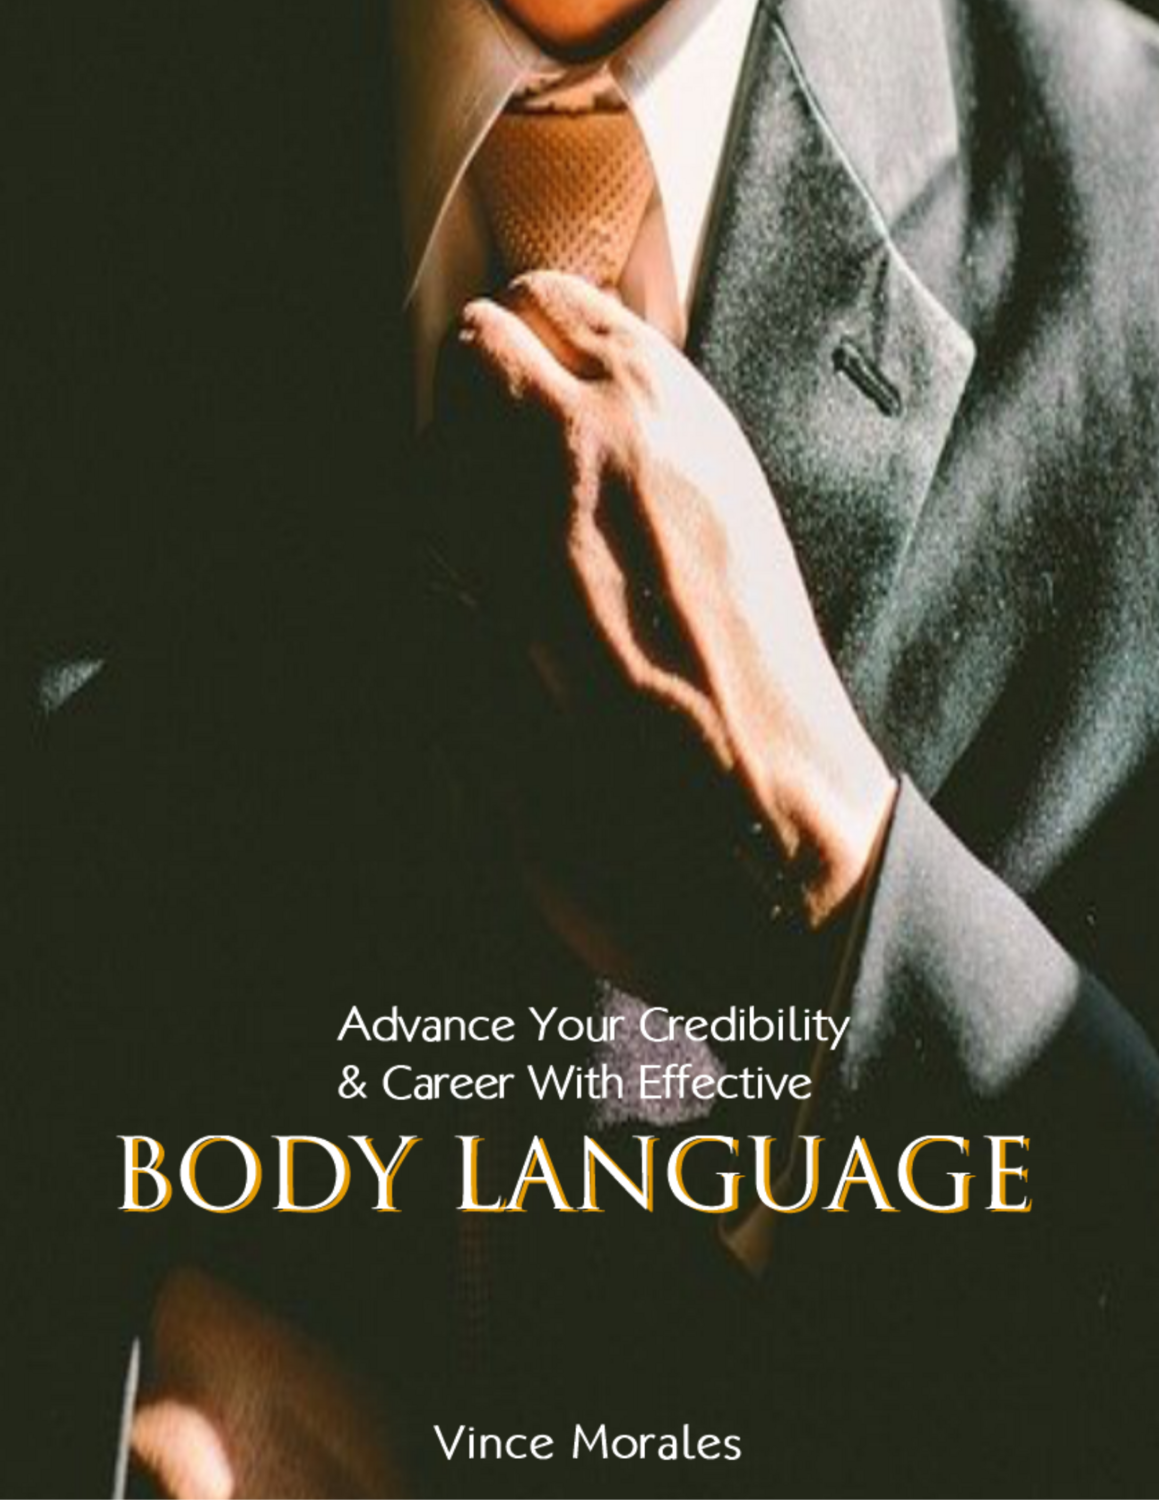 Advance Your Credibility & Career with Effective Body Language by Vince Morales